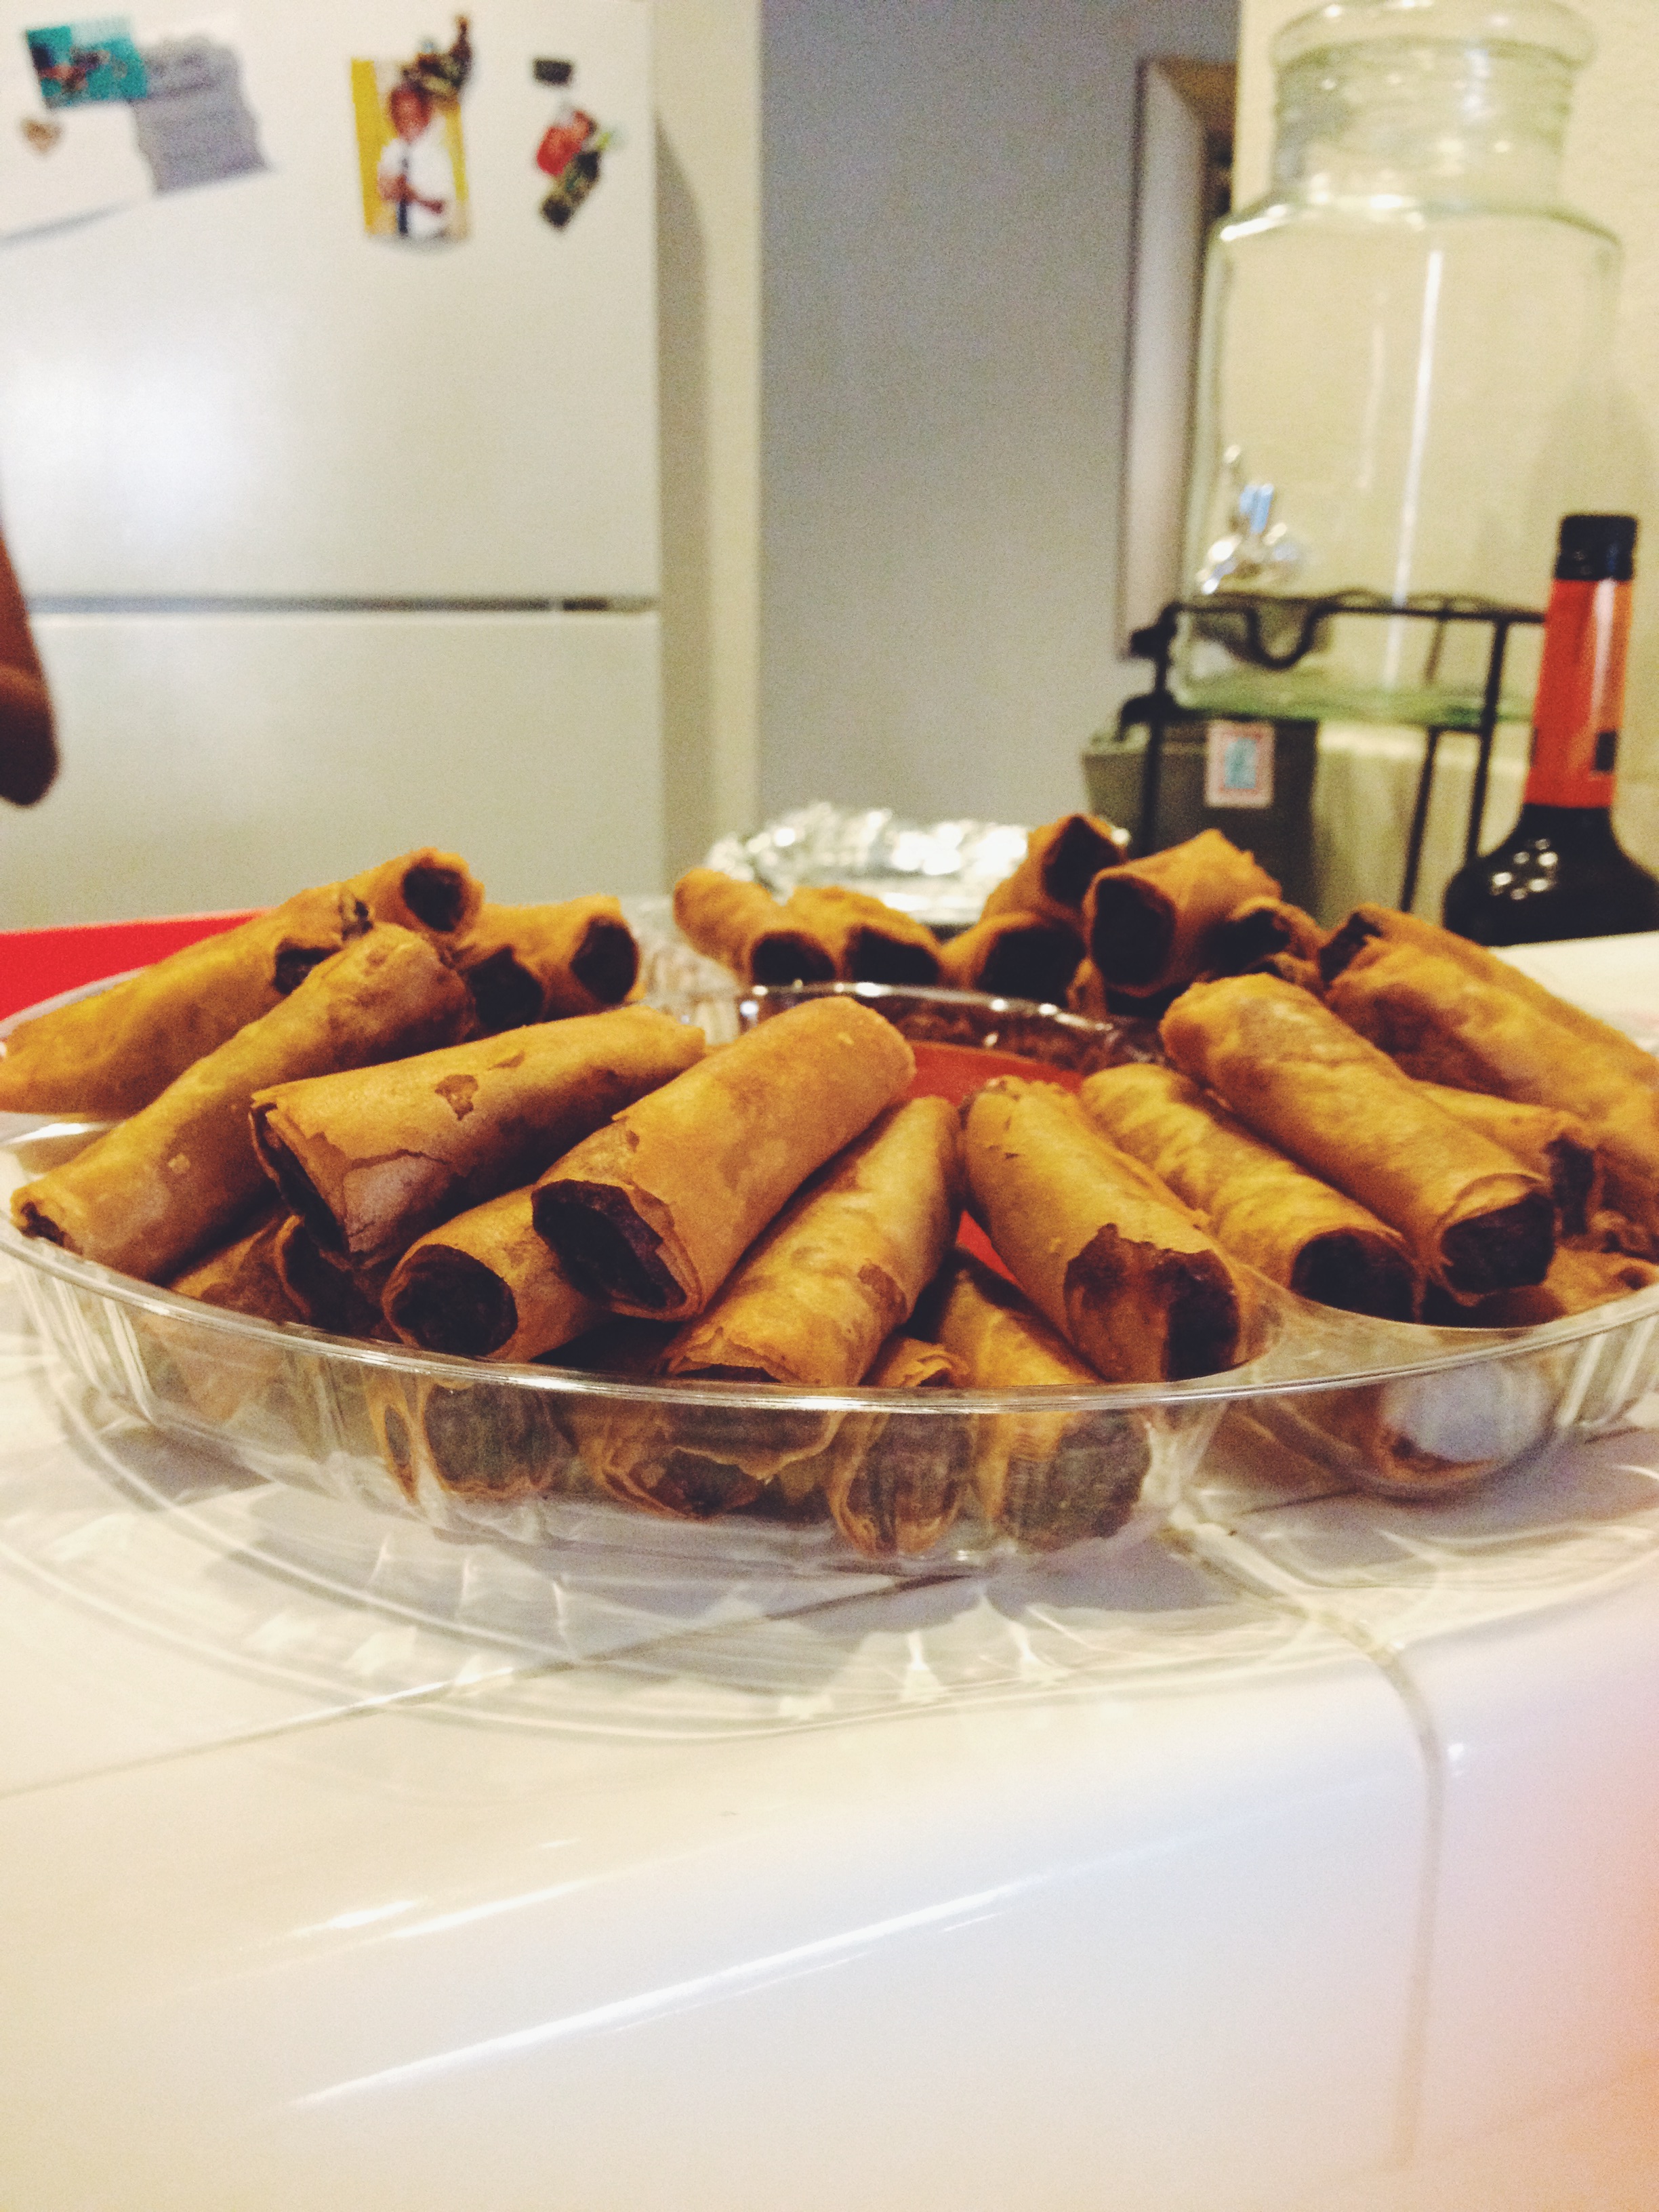 You can always count on a batch of lumpia ( a Philippine dish) to liven up a party!